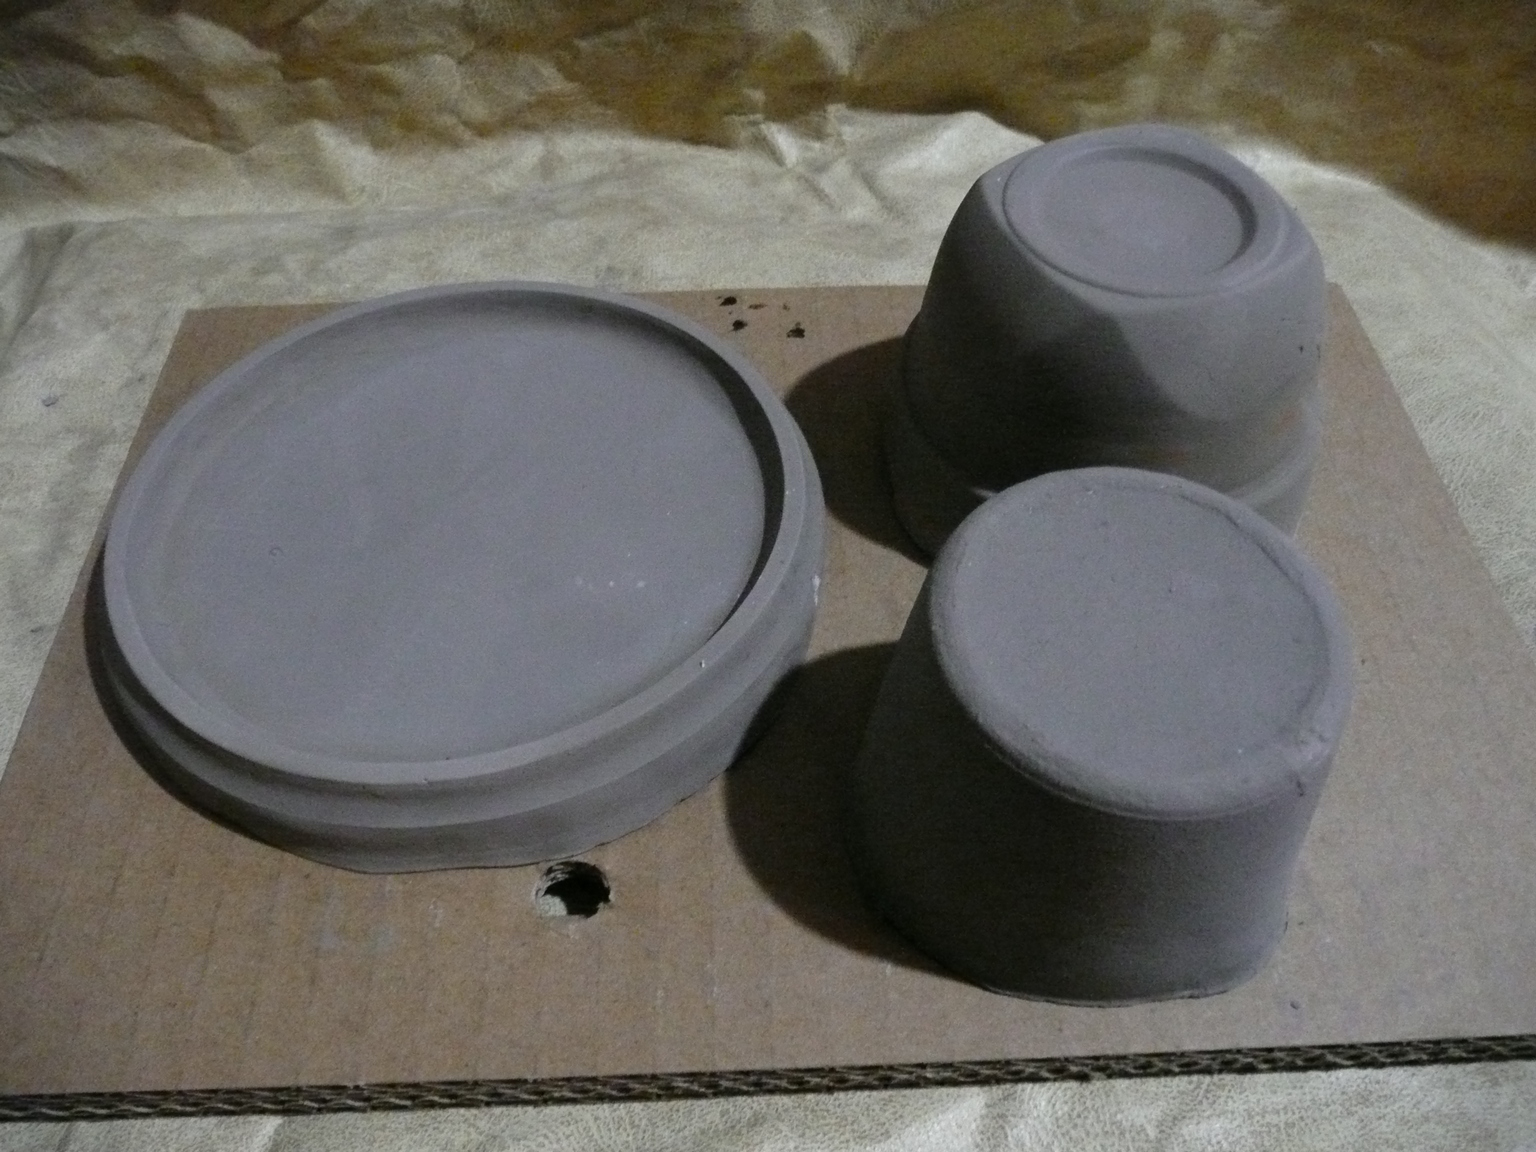      . How to make clay crucibles for melting metal